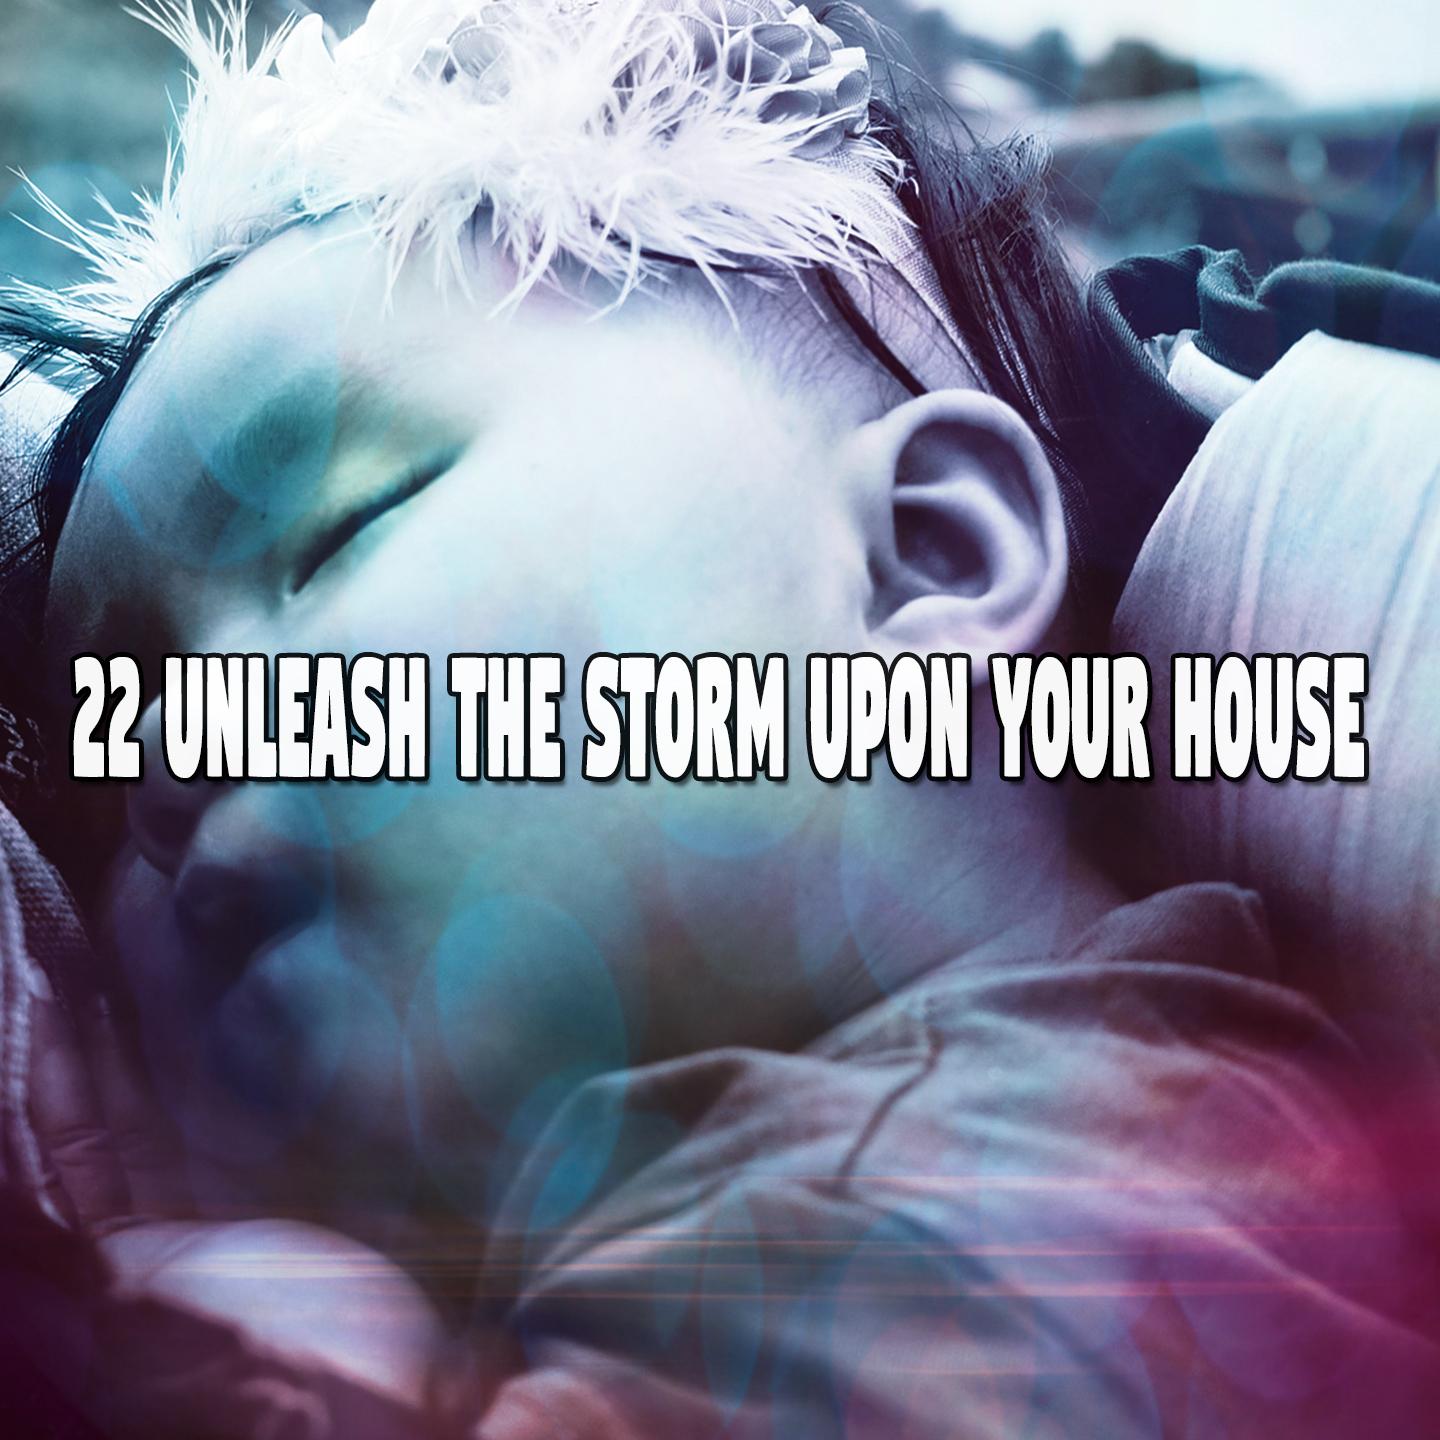 22 Unleash the Storm Upon Your House